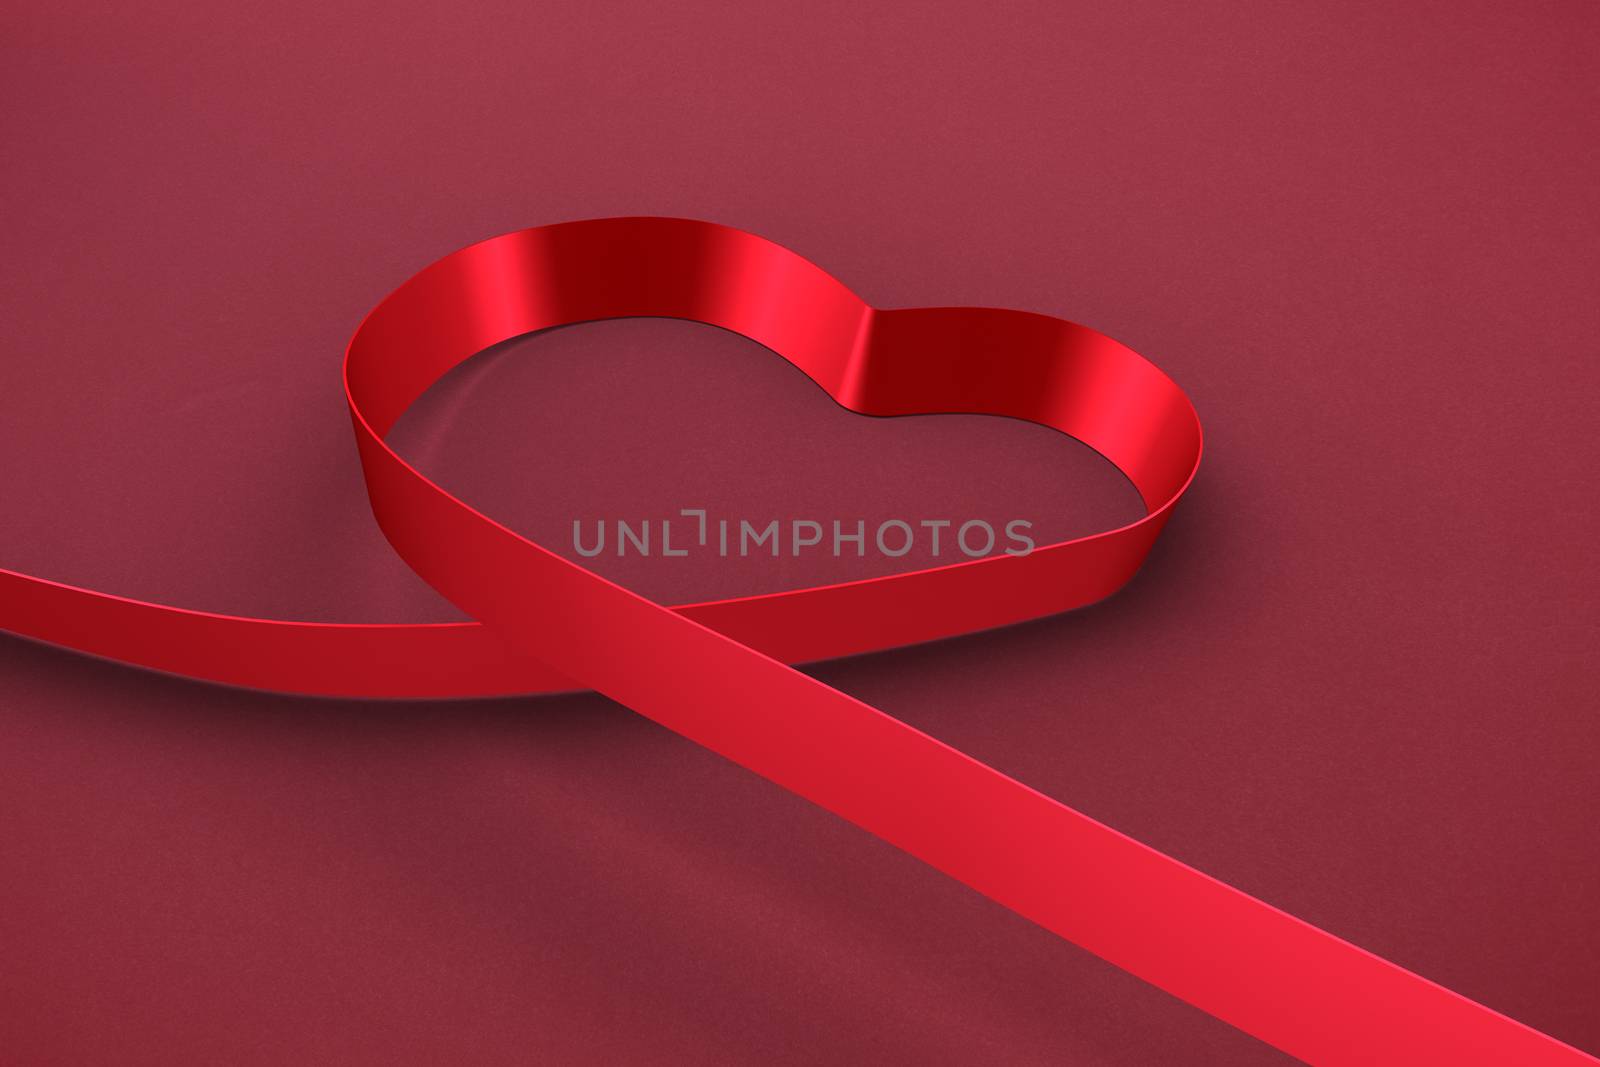 Red ribbon heart against red